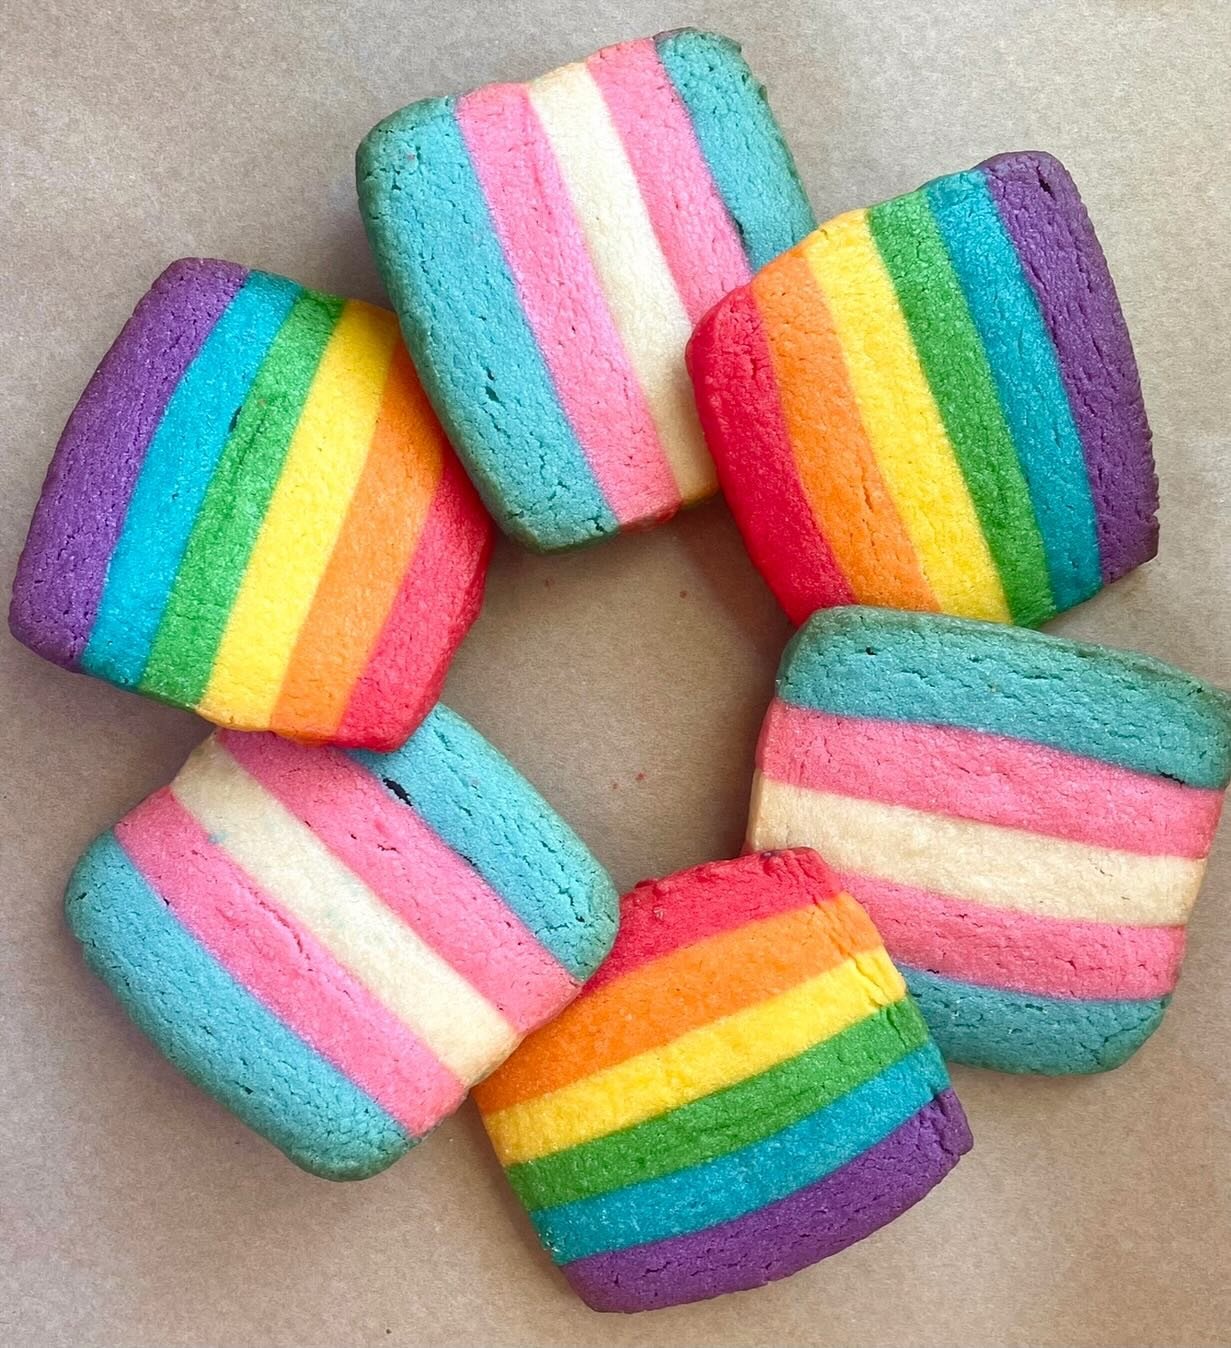 Want to order 100+ pride shortbread? Inquire by May 12th about extra large pride shortbread orders by emailing Arizmendieville@gmail.com. All other pride shortbread will be first come first serve and hit shelves in June! 🌈

Orders for 100+ pride sho